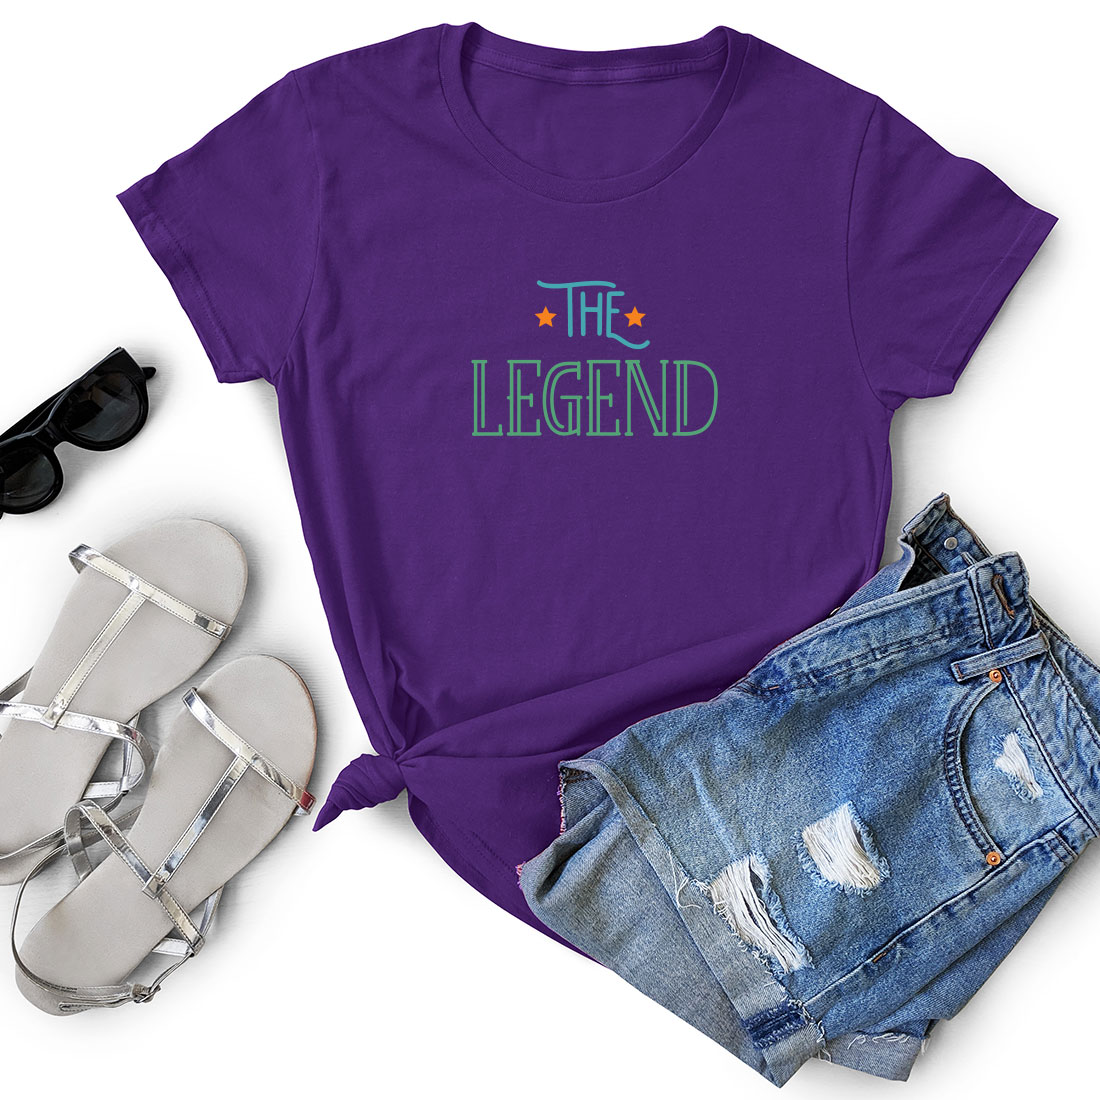 T - shirt that says the legend next to a pair of shorts.